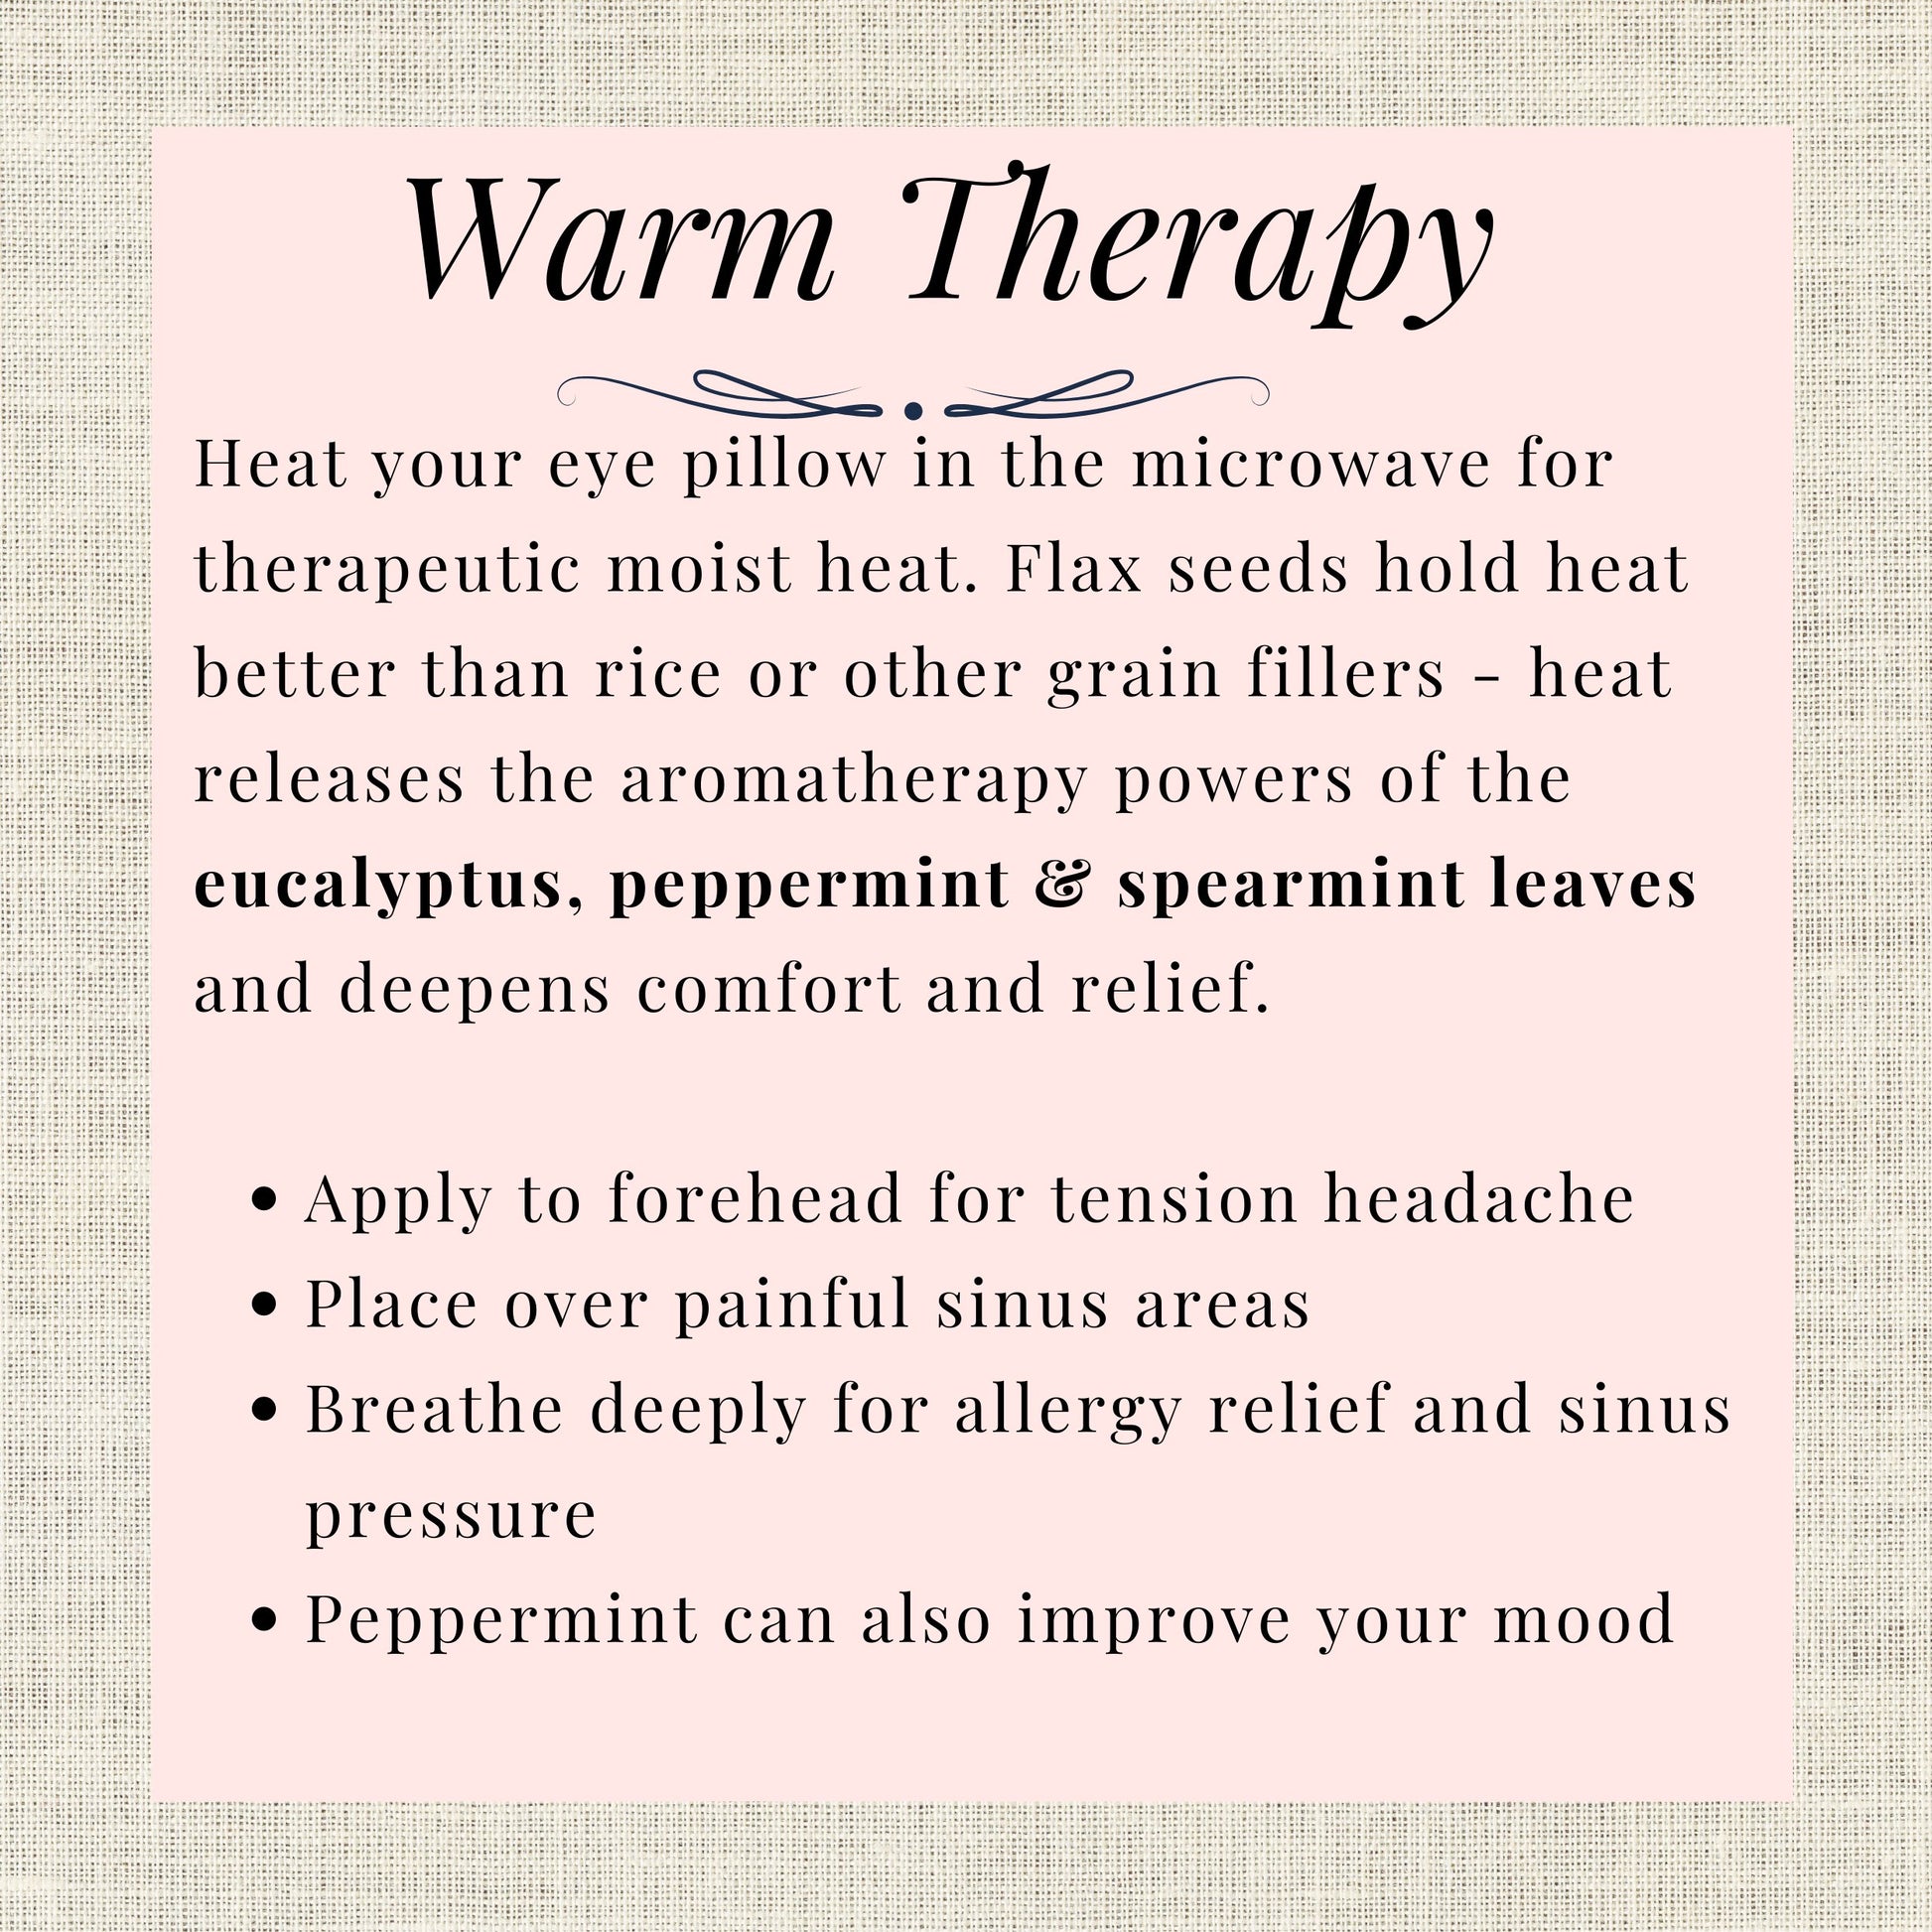 warm therapy for mint eye pillow infographic